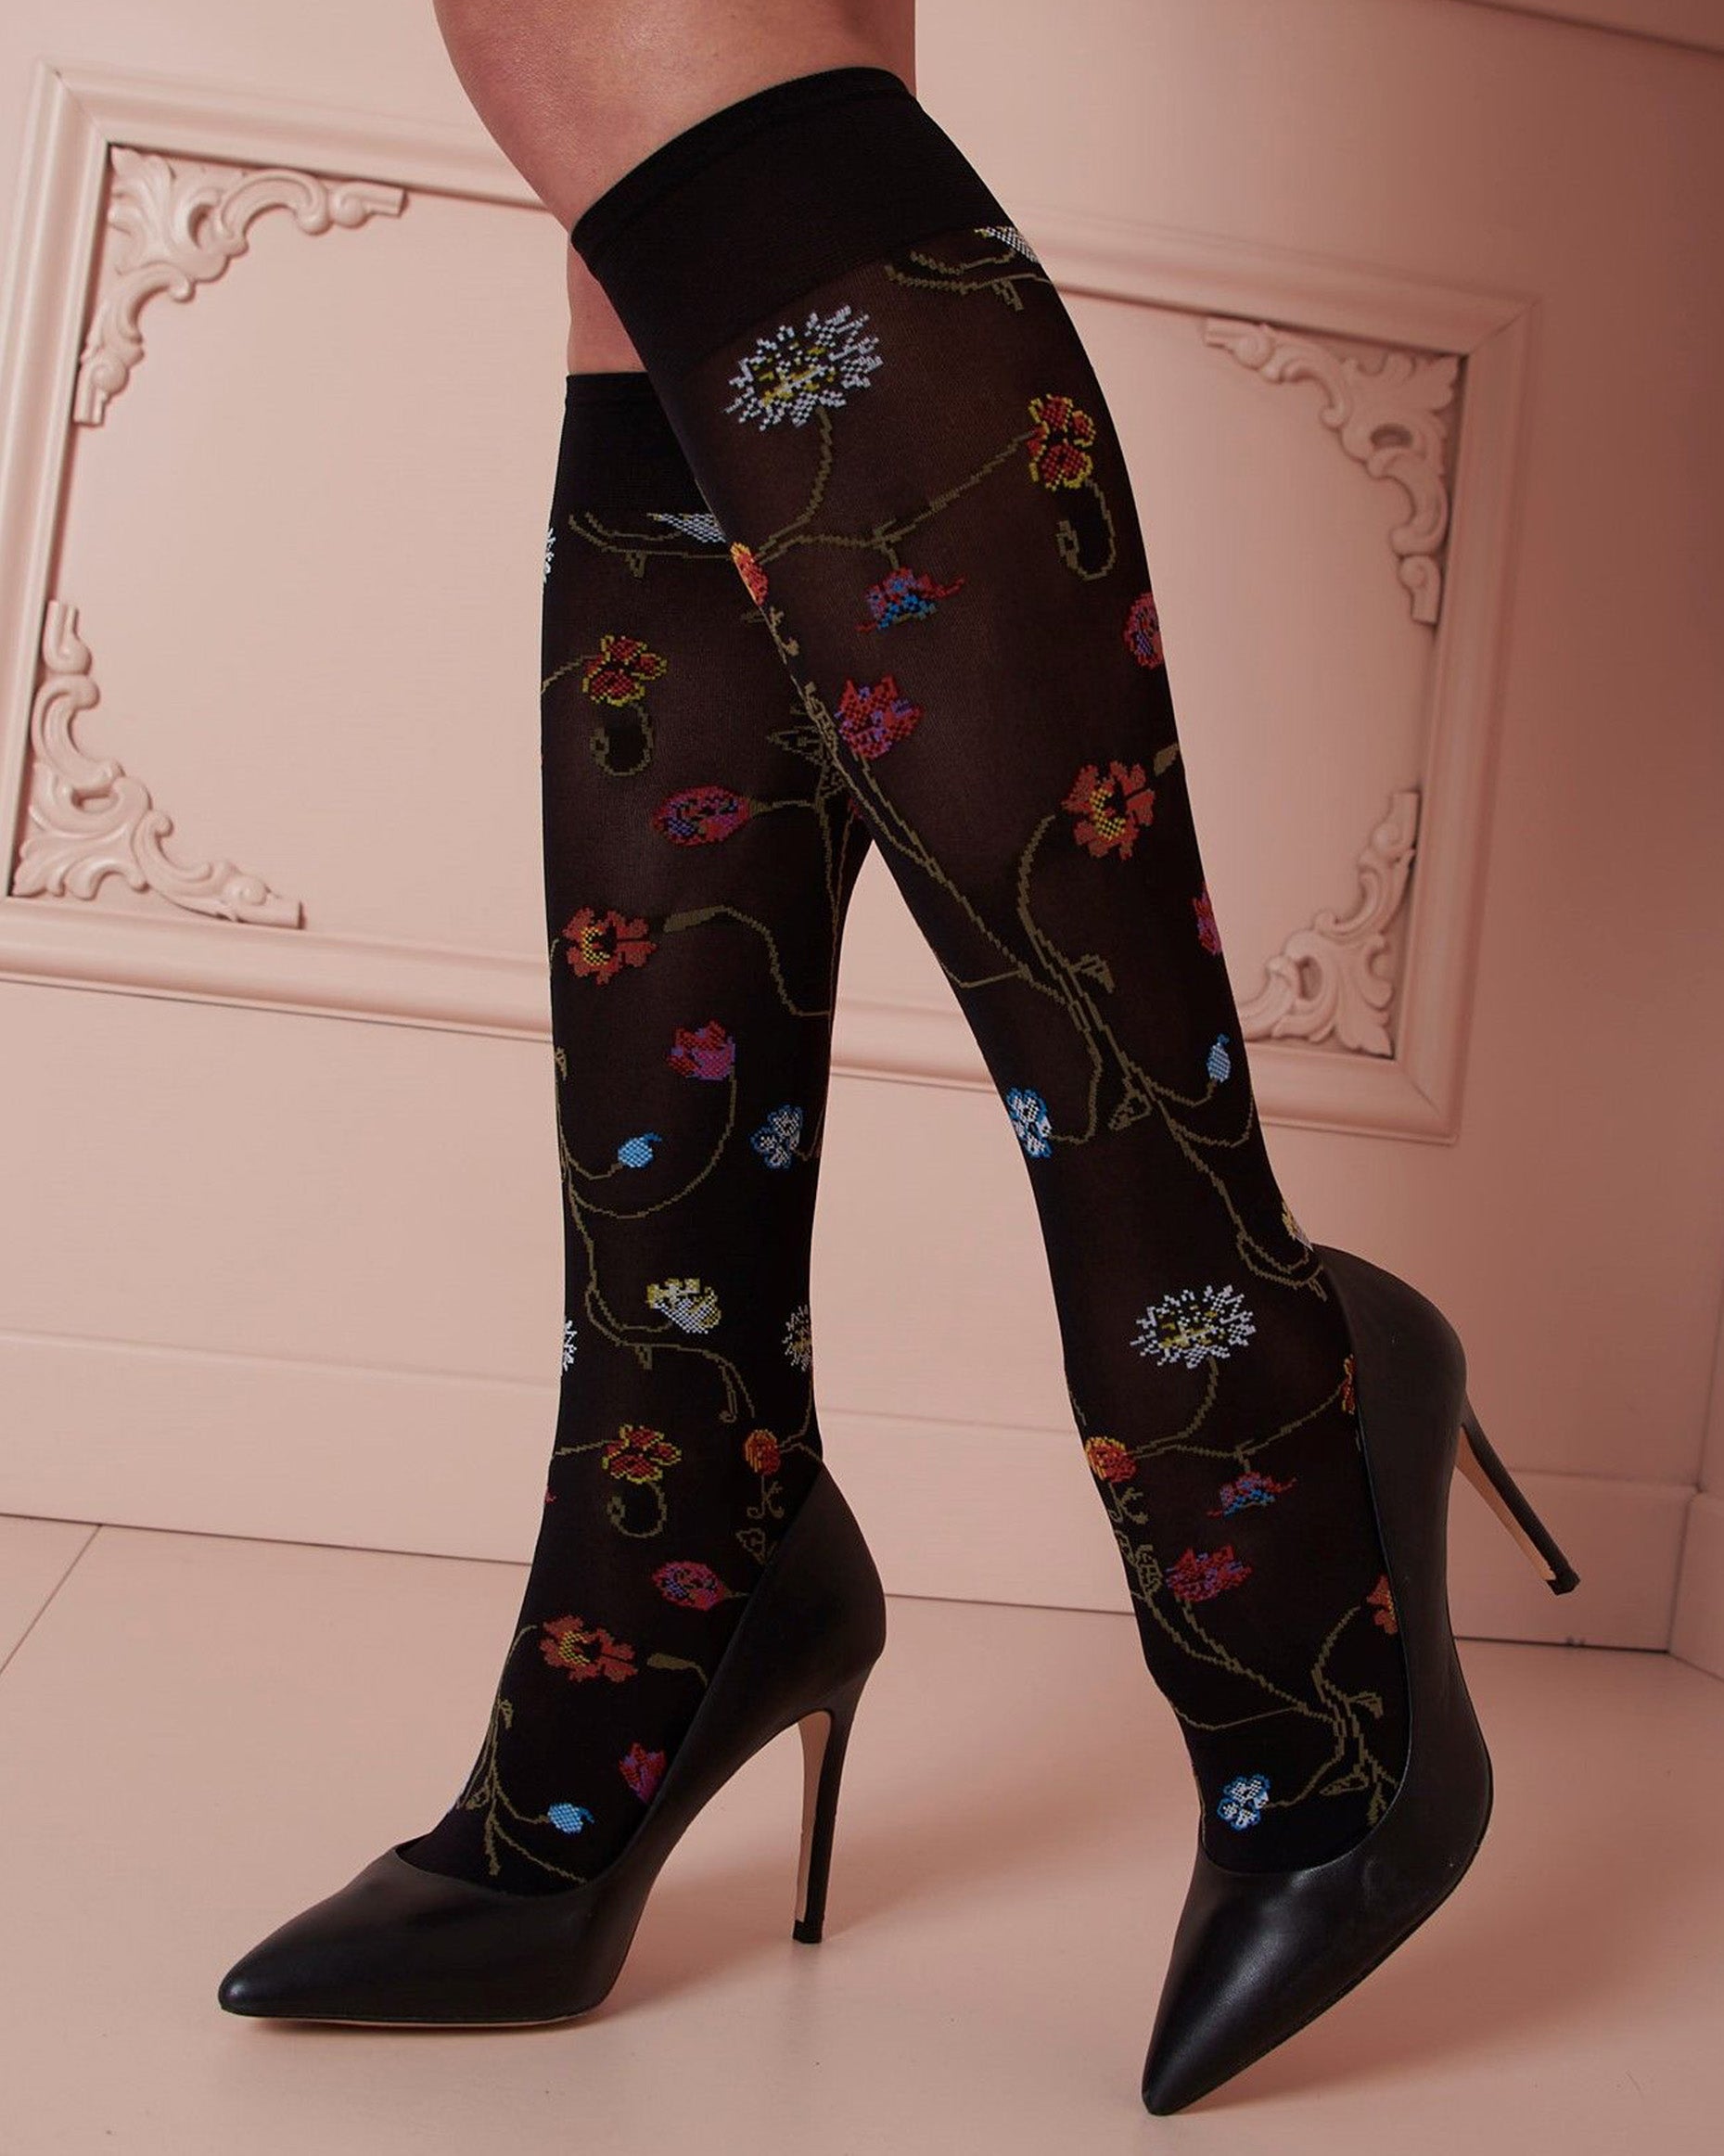 Trasparenze Platino Knee-highs - Black soft opaque fashion knee-high socks with a multicoloured woven floral pattern